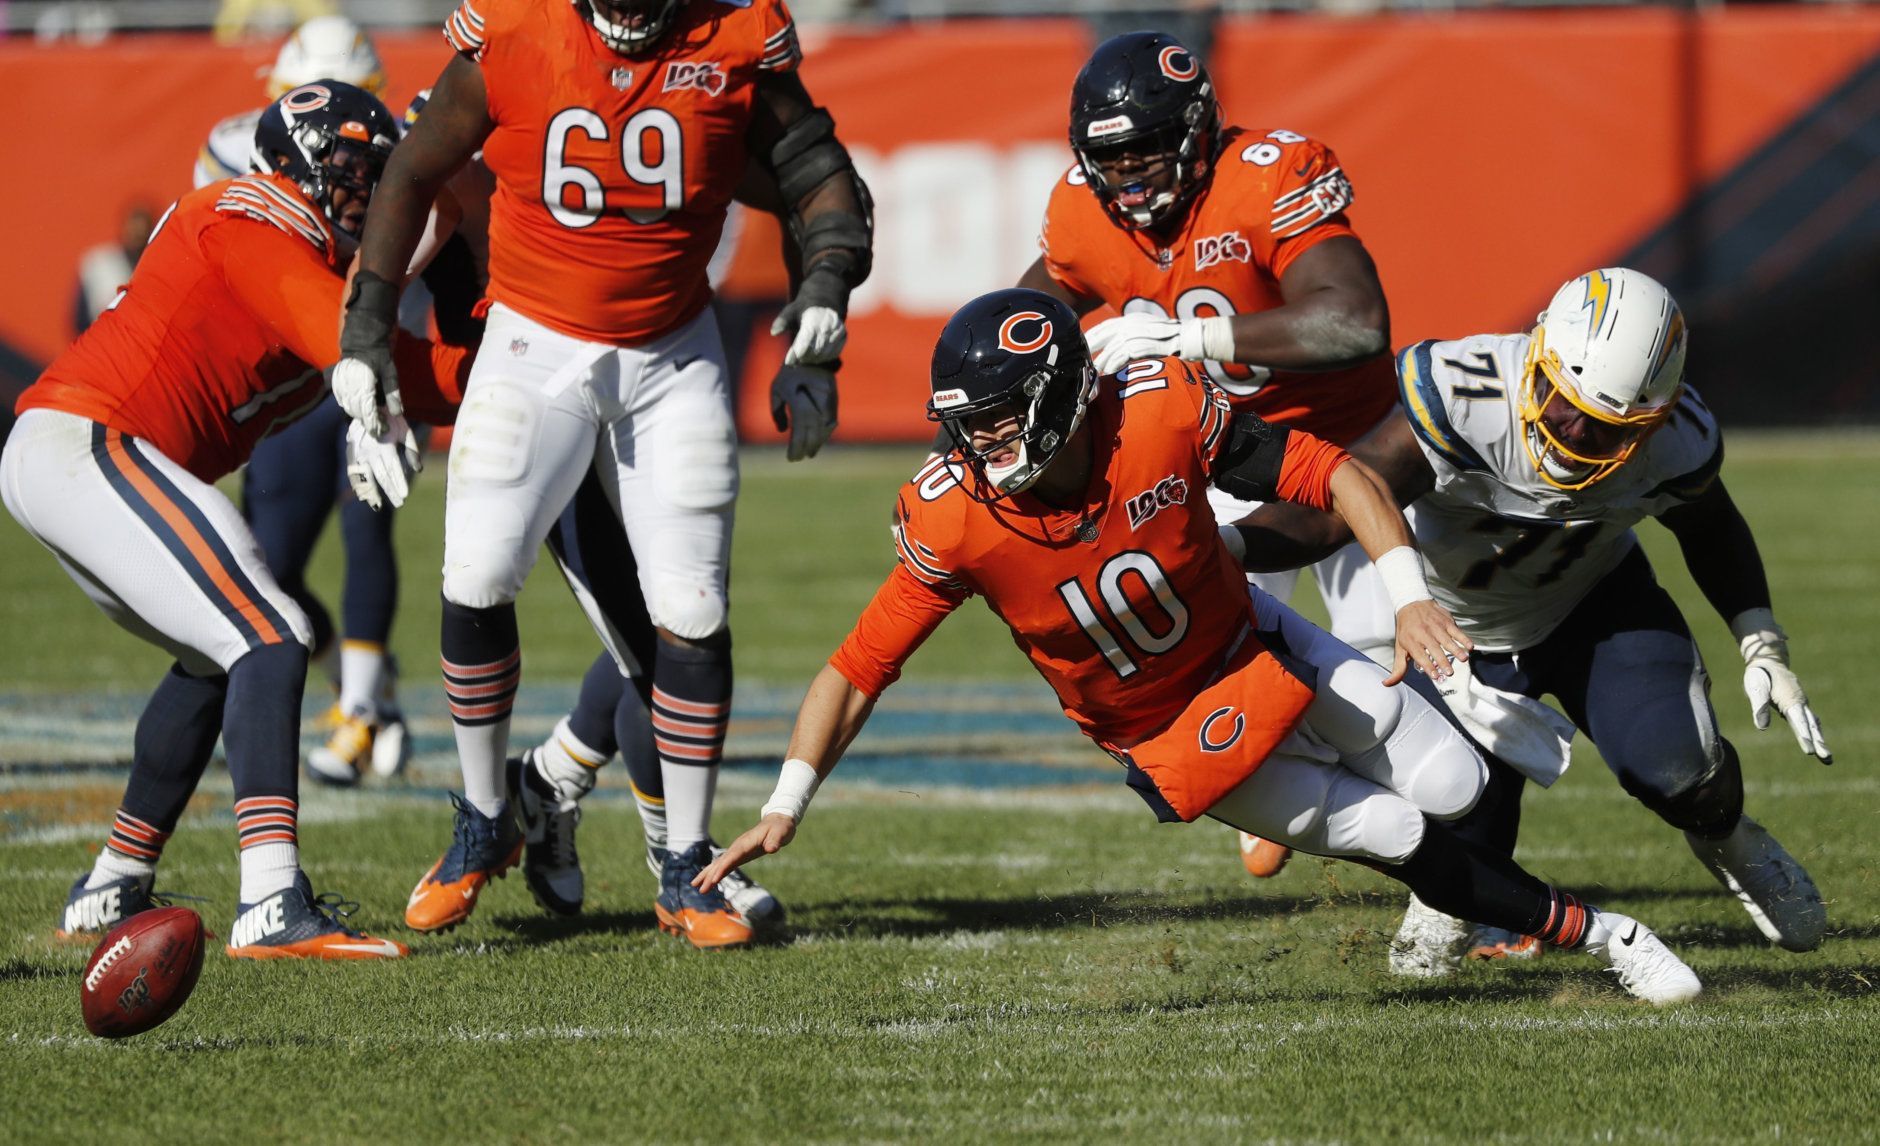 <p><b><i>Chargers 17</i></b><br />
<b><i>Bears 16</i></b></p>
<p>In a battle of teams dogged by late-game struggles, Chicago struggled harder and <a href="https://deadspin.com/bears-fans-boo-team-off-the-field-after-offense-freezes-1839398855?utm_campaign=socialflow_deadspin_facebook&amp;utm_medium=socialflow&amp;utm_source=deadspin_facebook&amp;fbclid=IwAR2eCVsI0uhO-U3oiF0OBVAyTkMV9_sT8i8FeT4SZlKOY597TkoHPGdRLw4" target="_blank" rel="noopener" data-saferedirecturl="https://www.google.com/url?q=https://deadspin.com/bears-fans-boo-team-off-the-field-after-offense-freezes-1839398855?utm_campaign%3Dsocialflow_deadspin_facebook%26utm_medium%3Dsocialflow%26utm_source%3Ddeadspin_facebook%26fbclid%3DIwAR2eCVsI0uhO-U3oiF0OBVAyTkMV9_sT8i8FeT4SZlKOY597TkoHPGdRLw4&amp;source=gmail&amp;ust=1572303497135000&amp;usg=AFQjCNGvtl-MwryE3UV_IDR1CrKecmp7-g">their crowd reminded them of it</a>. Matt Nagy and Mitchell Trubisky are wasting a great Bears defense — and an opportunity to stand out in a wide open NFC.</p>
